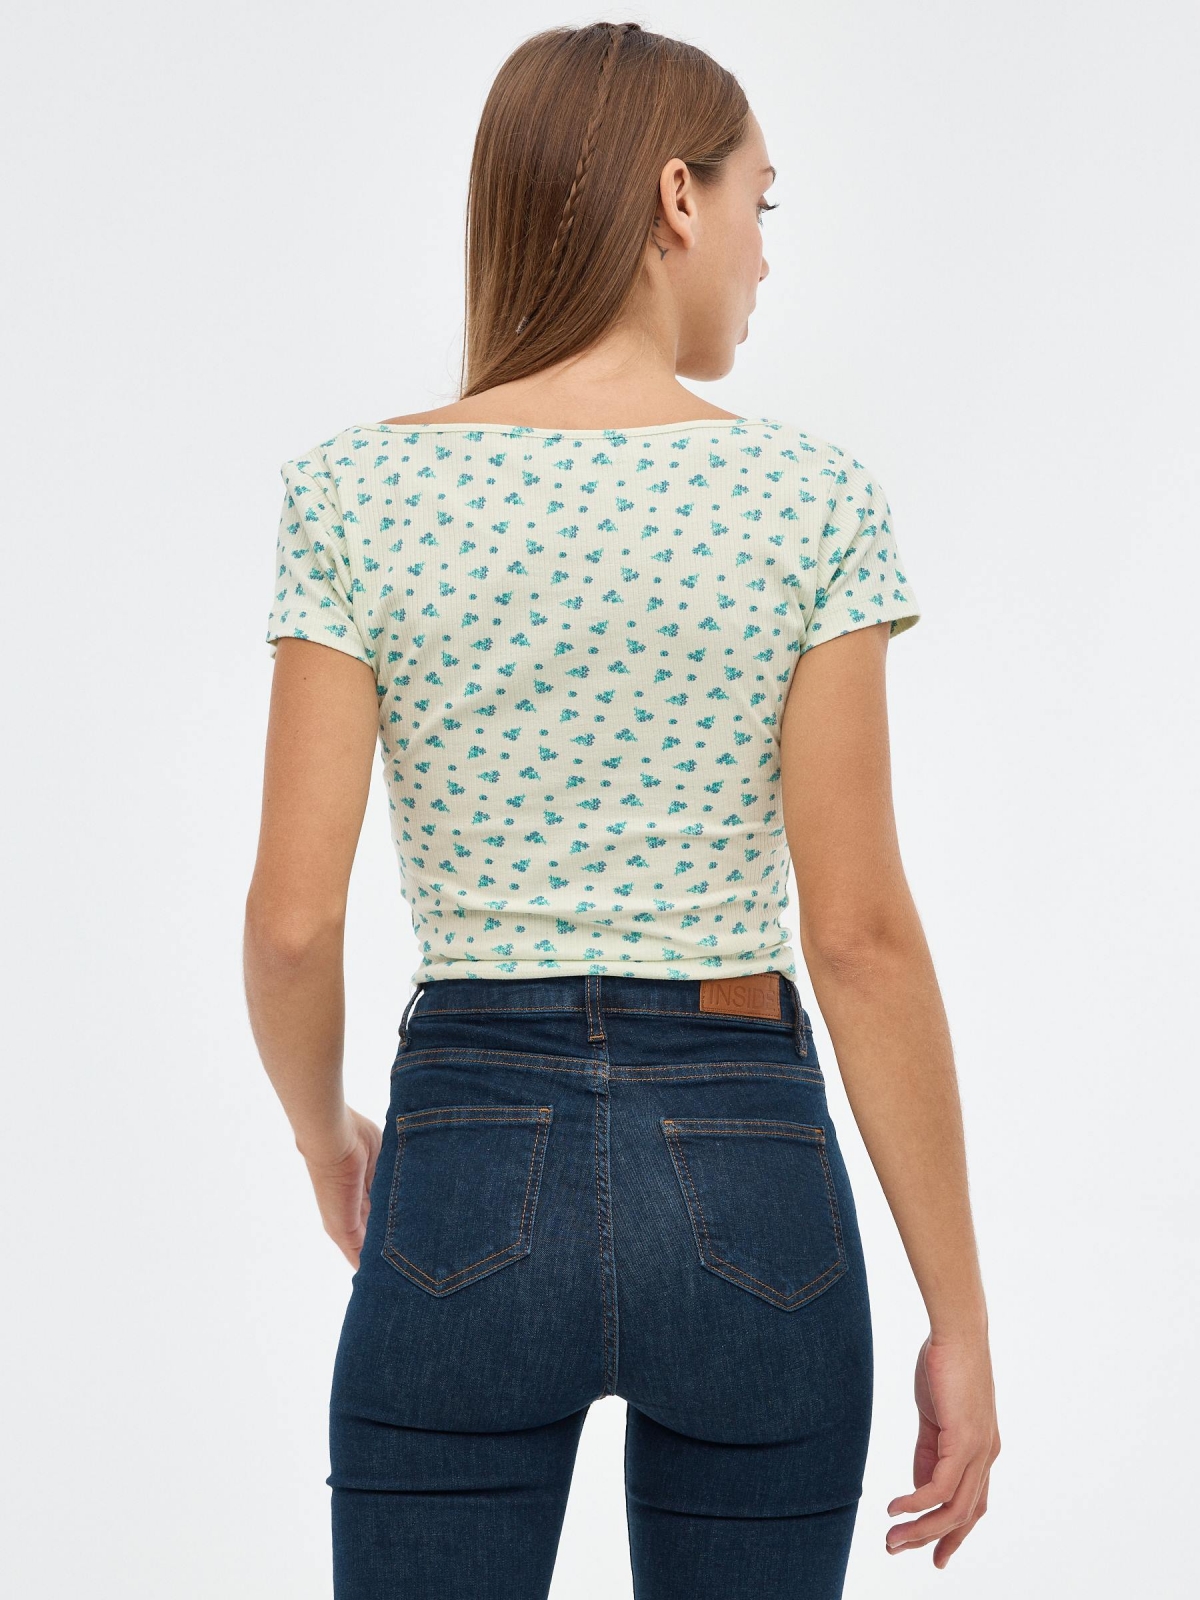 Floral print top light green middle back view